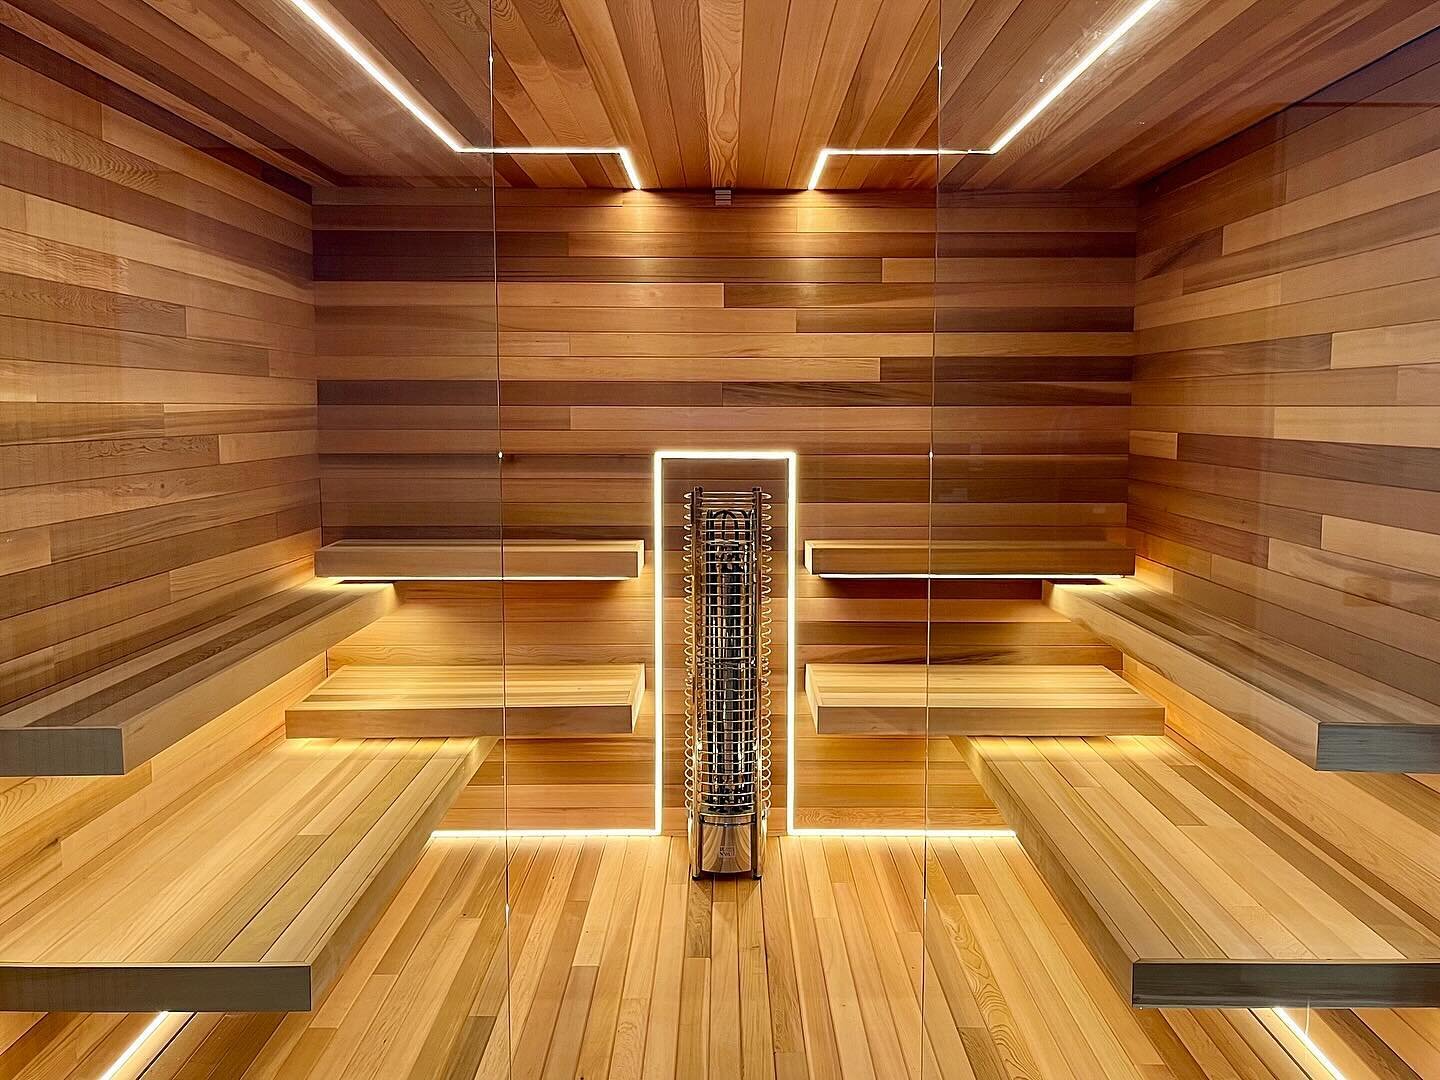 Our client&rsquo;s custom lighting for their sauna looks like a piece of art. Amazing results.